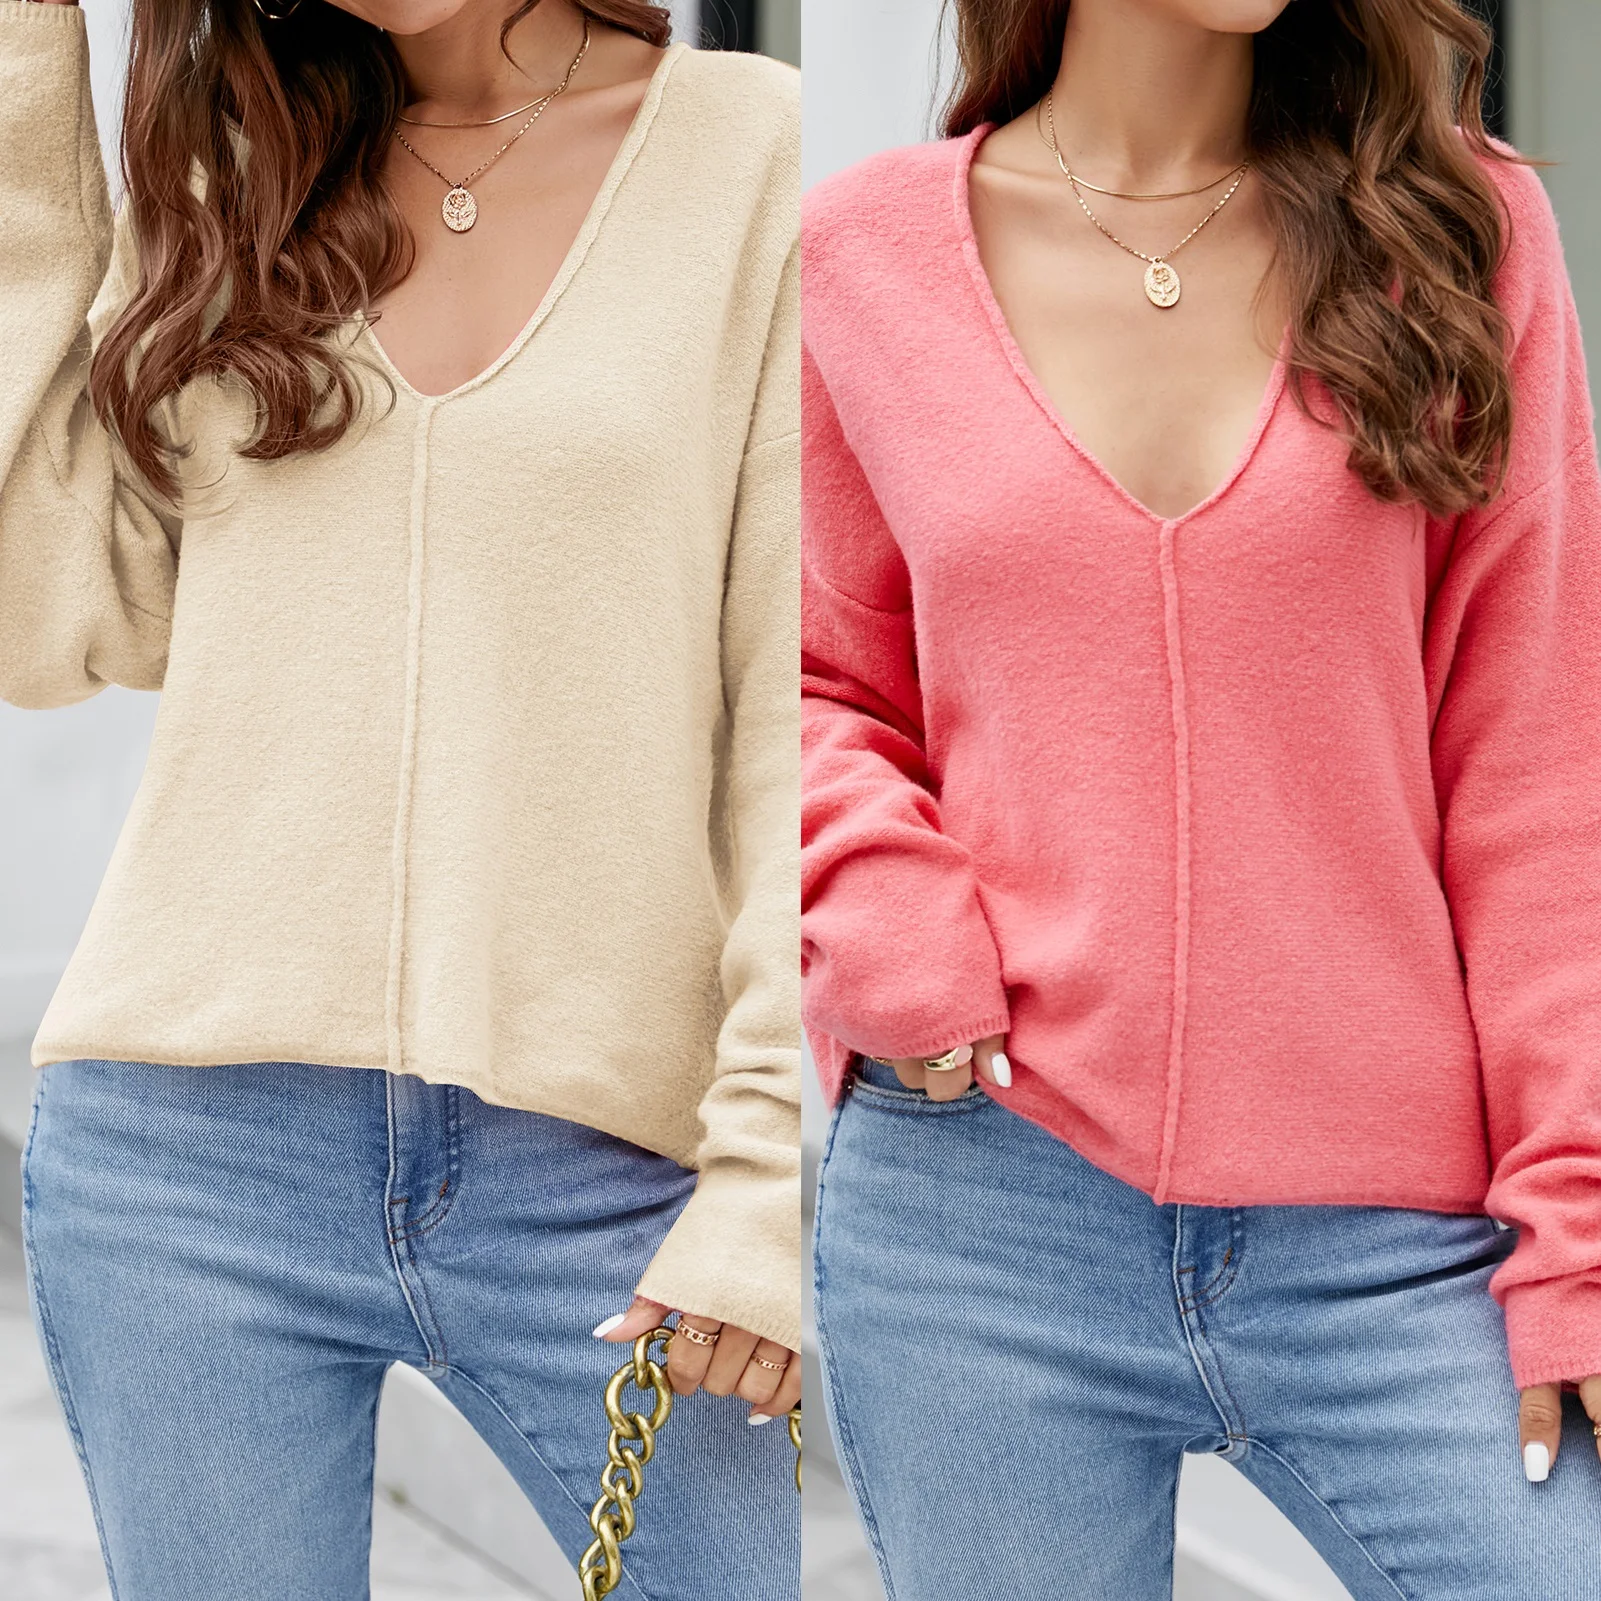 

Women Sweater Autumn Winter V-neck Knitwear Long Sleeve Cami Shirt Top Batwing Sleeve Pullovers Lady Quality Jumper Knitted Tops